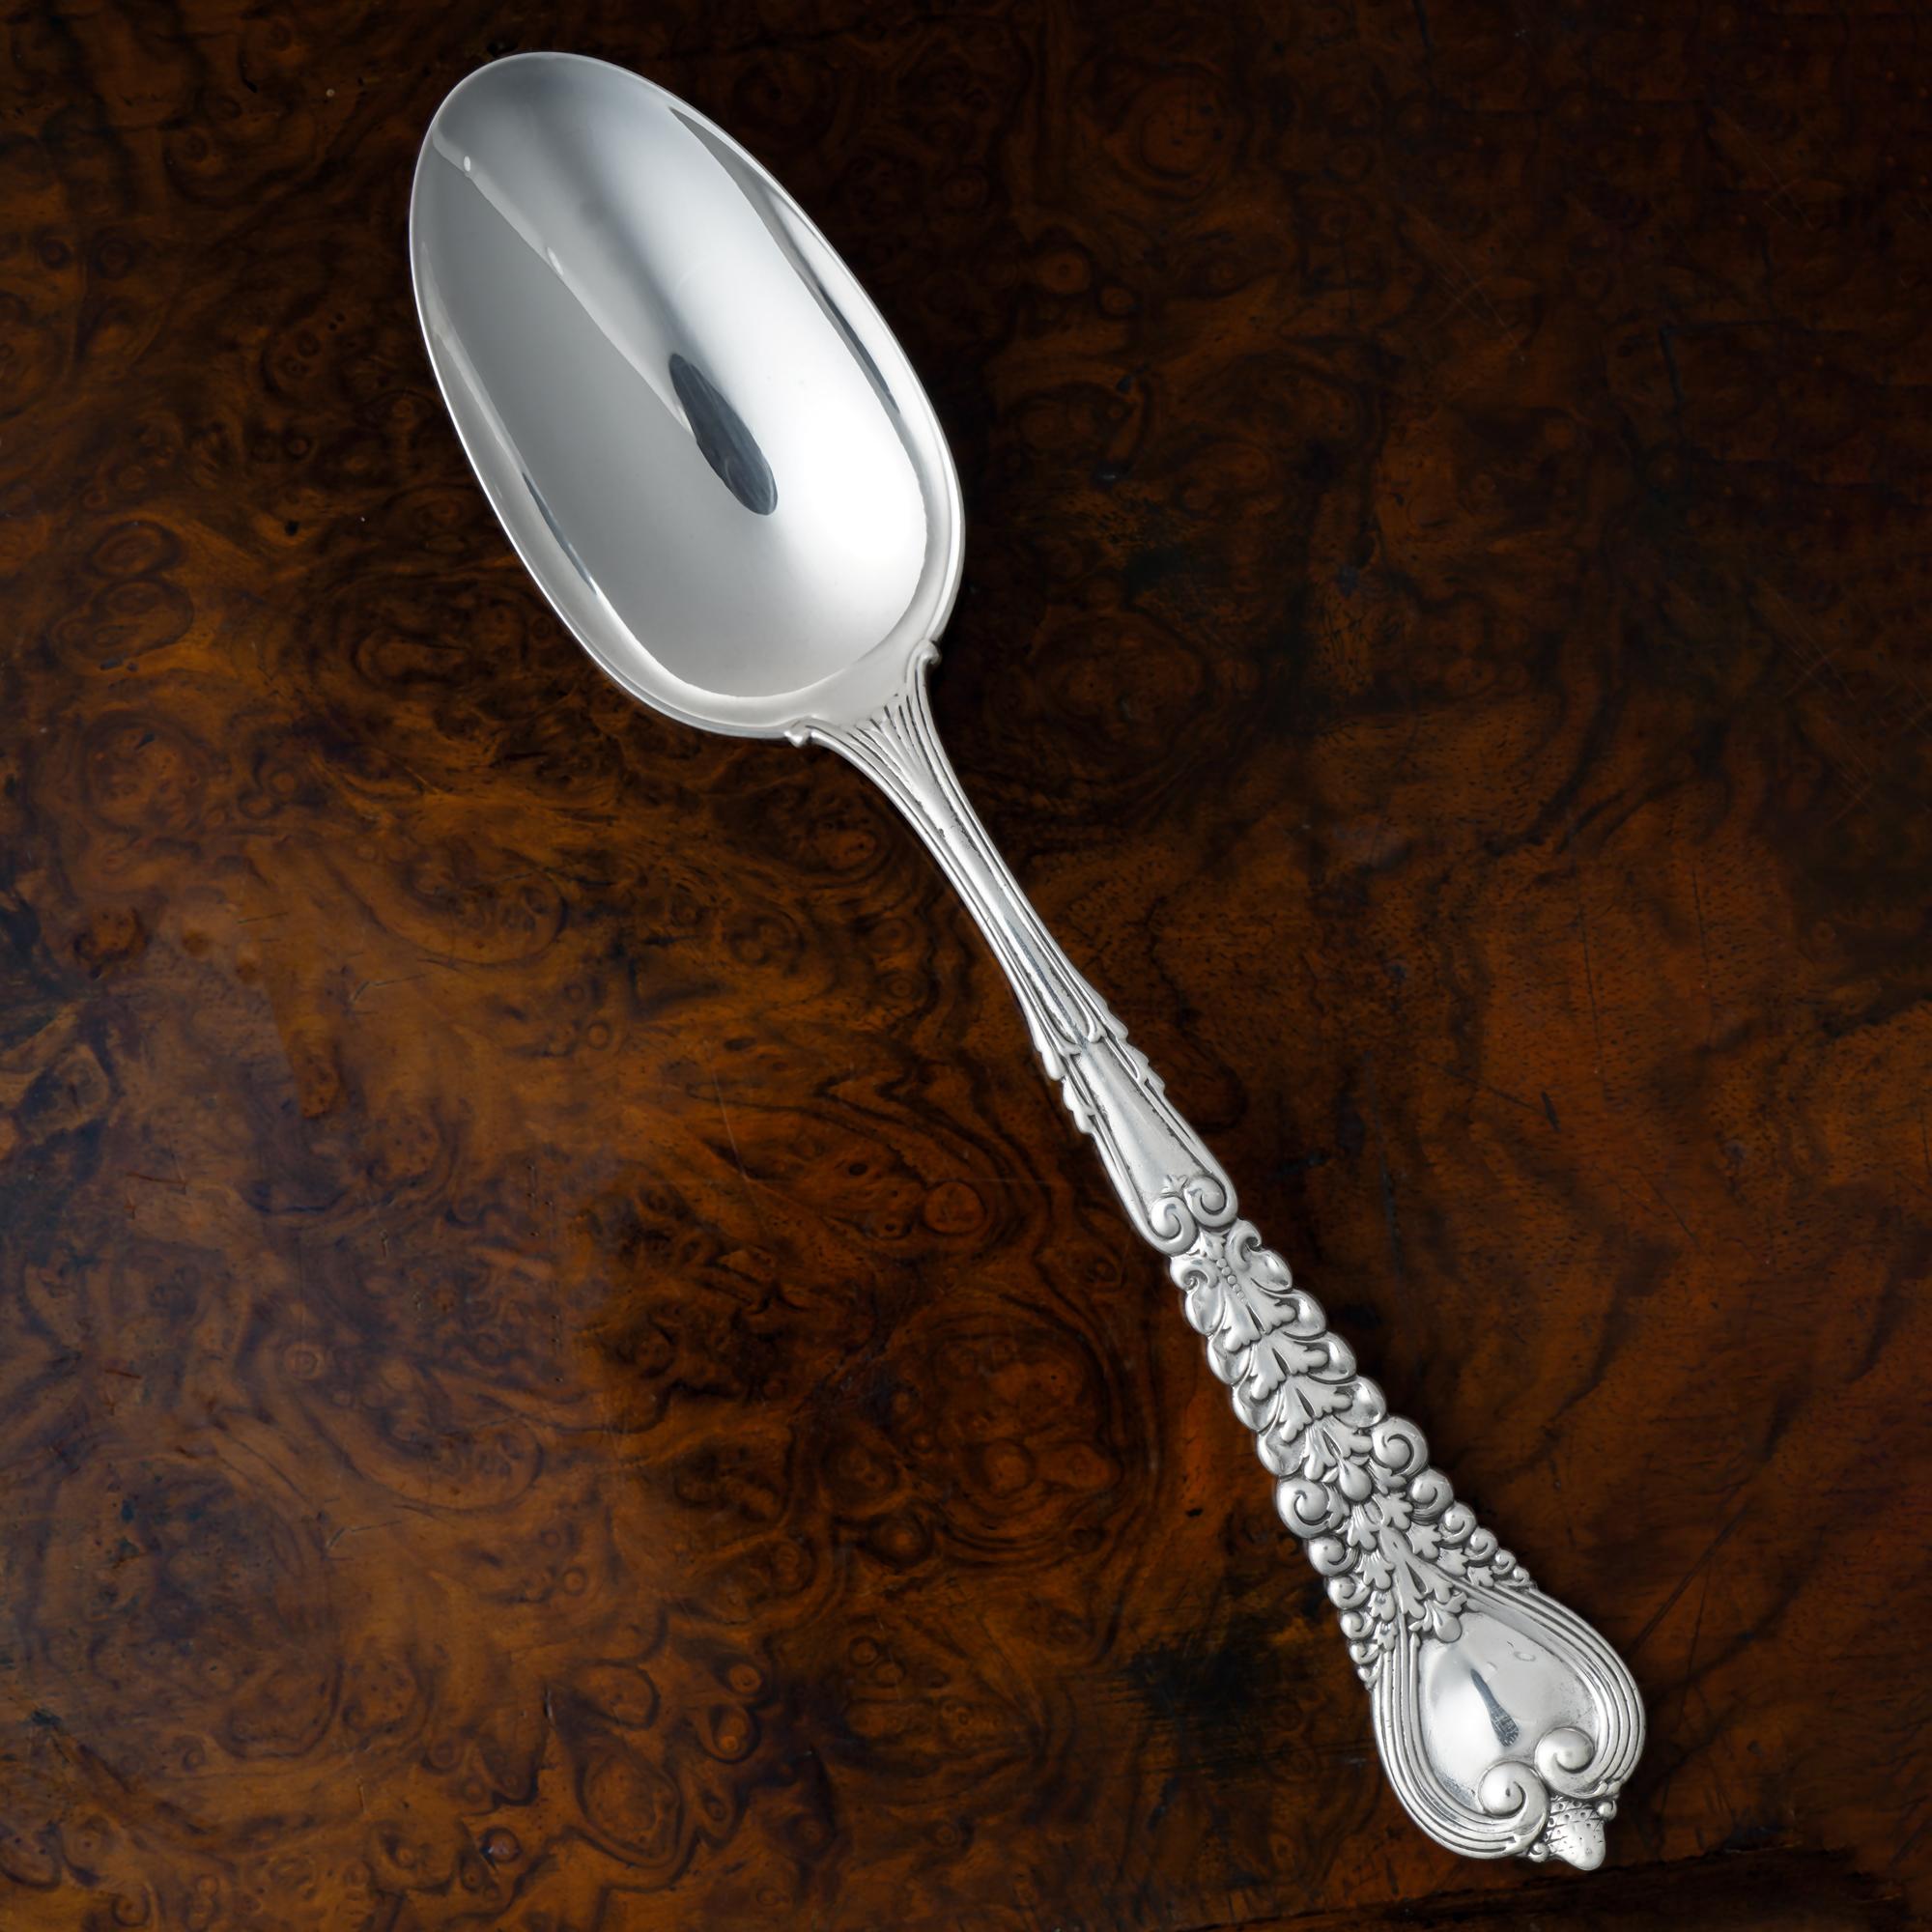 Antique Tiffany & Co. sterling silver Florentine pattern large spoon. 

Maker: Tiffany & Co
Pattern: Designed by Paulding Farnham
Style: Renaissance Revival
Introduced 1900, but the patent application not filed until May 9, 1904, issued June 7,